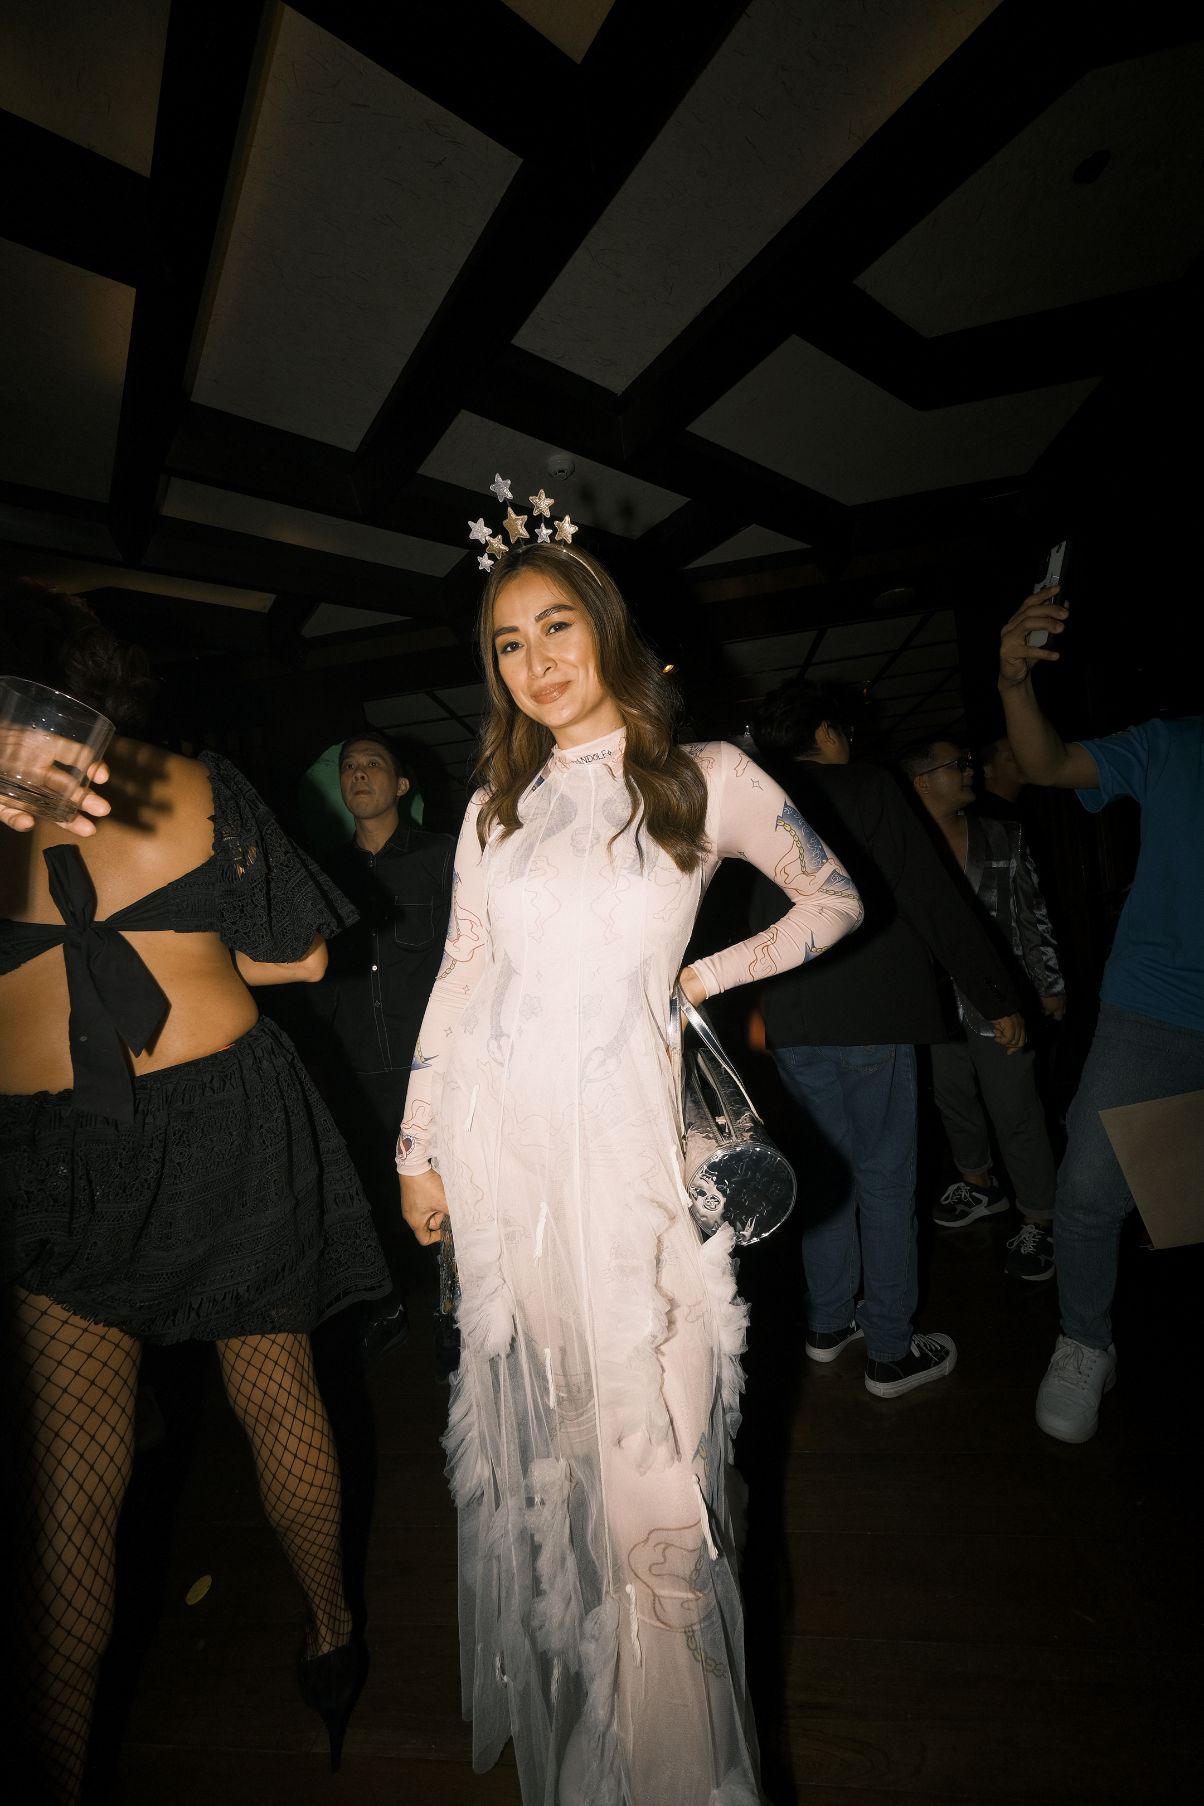 The Best Costumes From Tim Yap's Annual Halloween Party